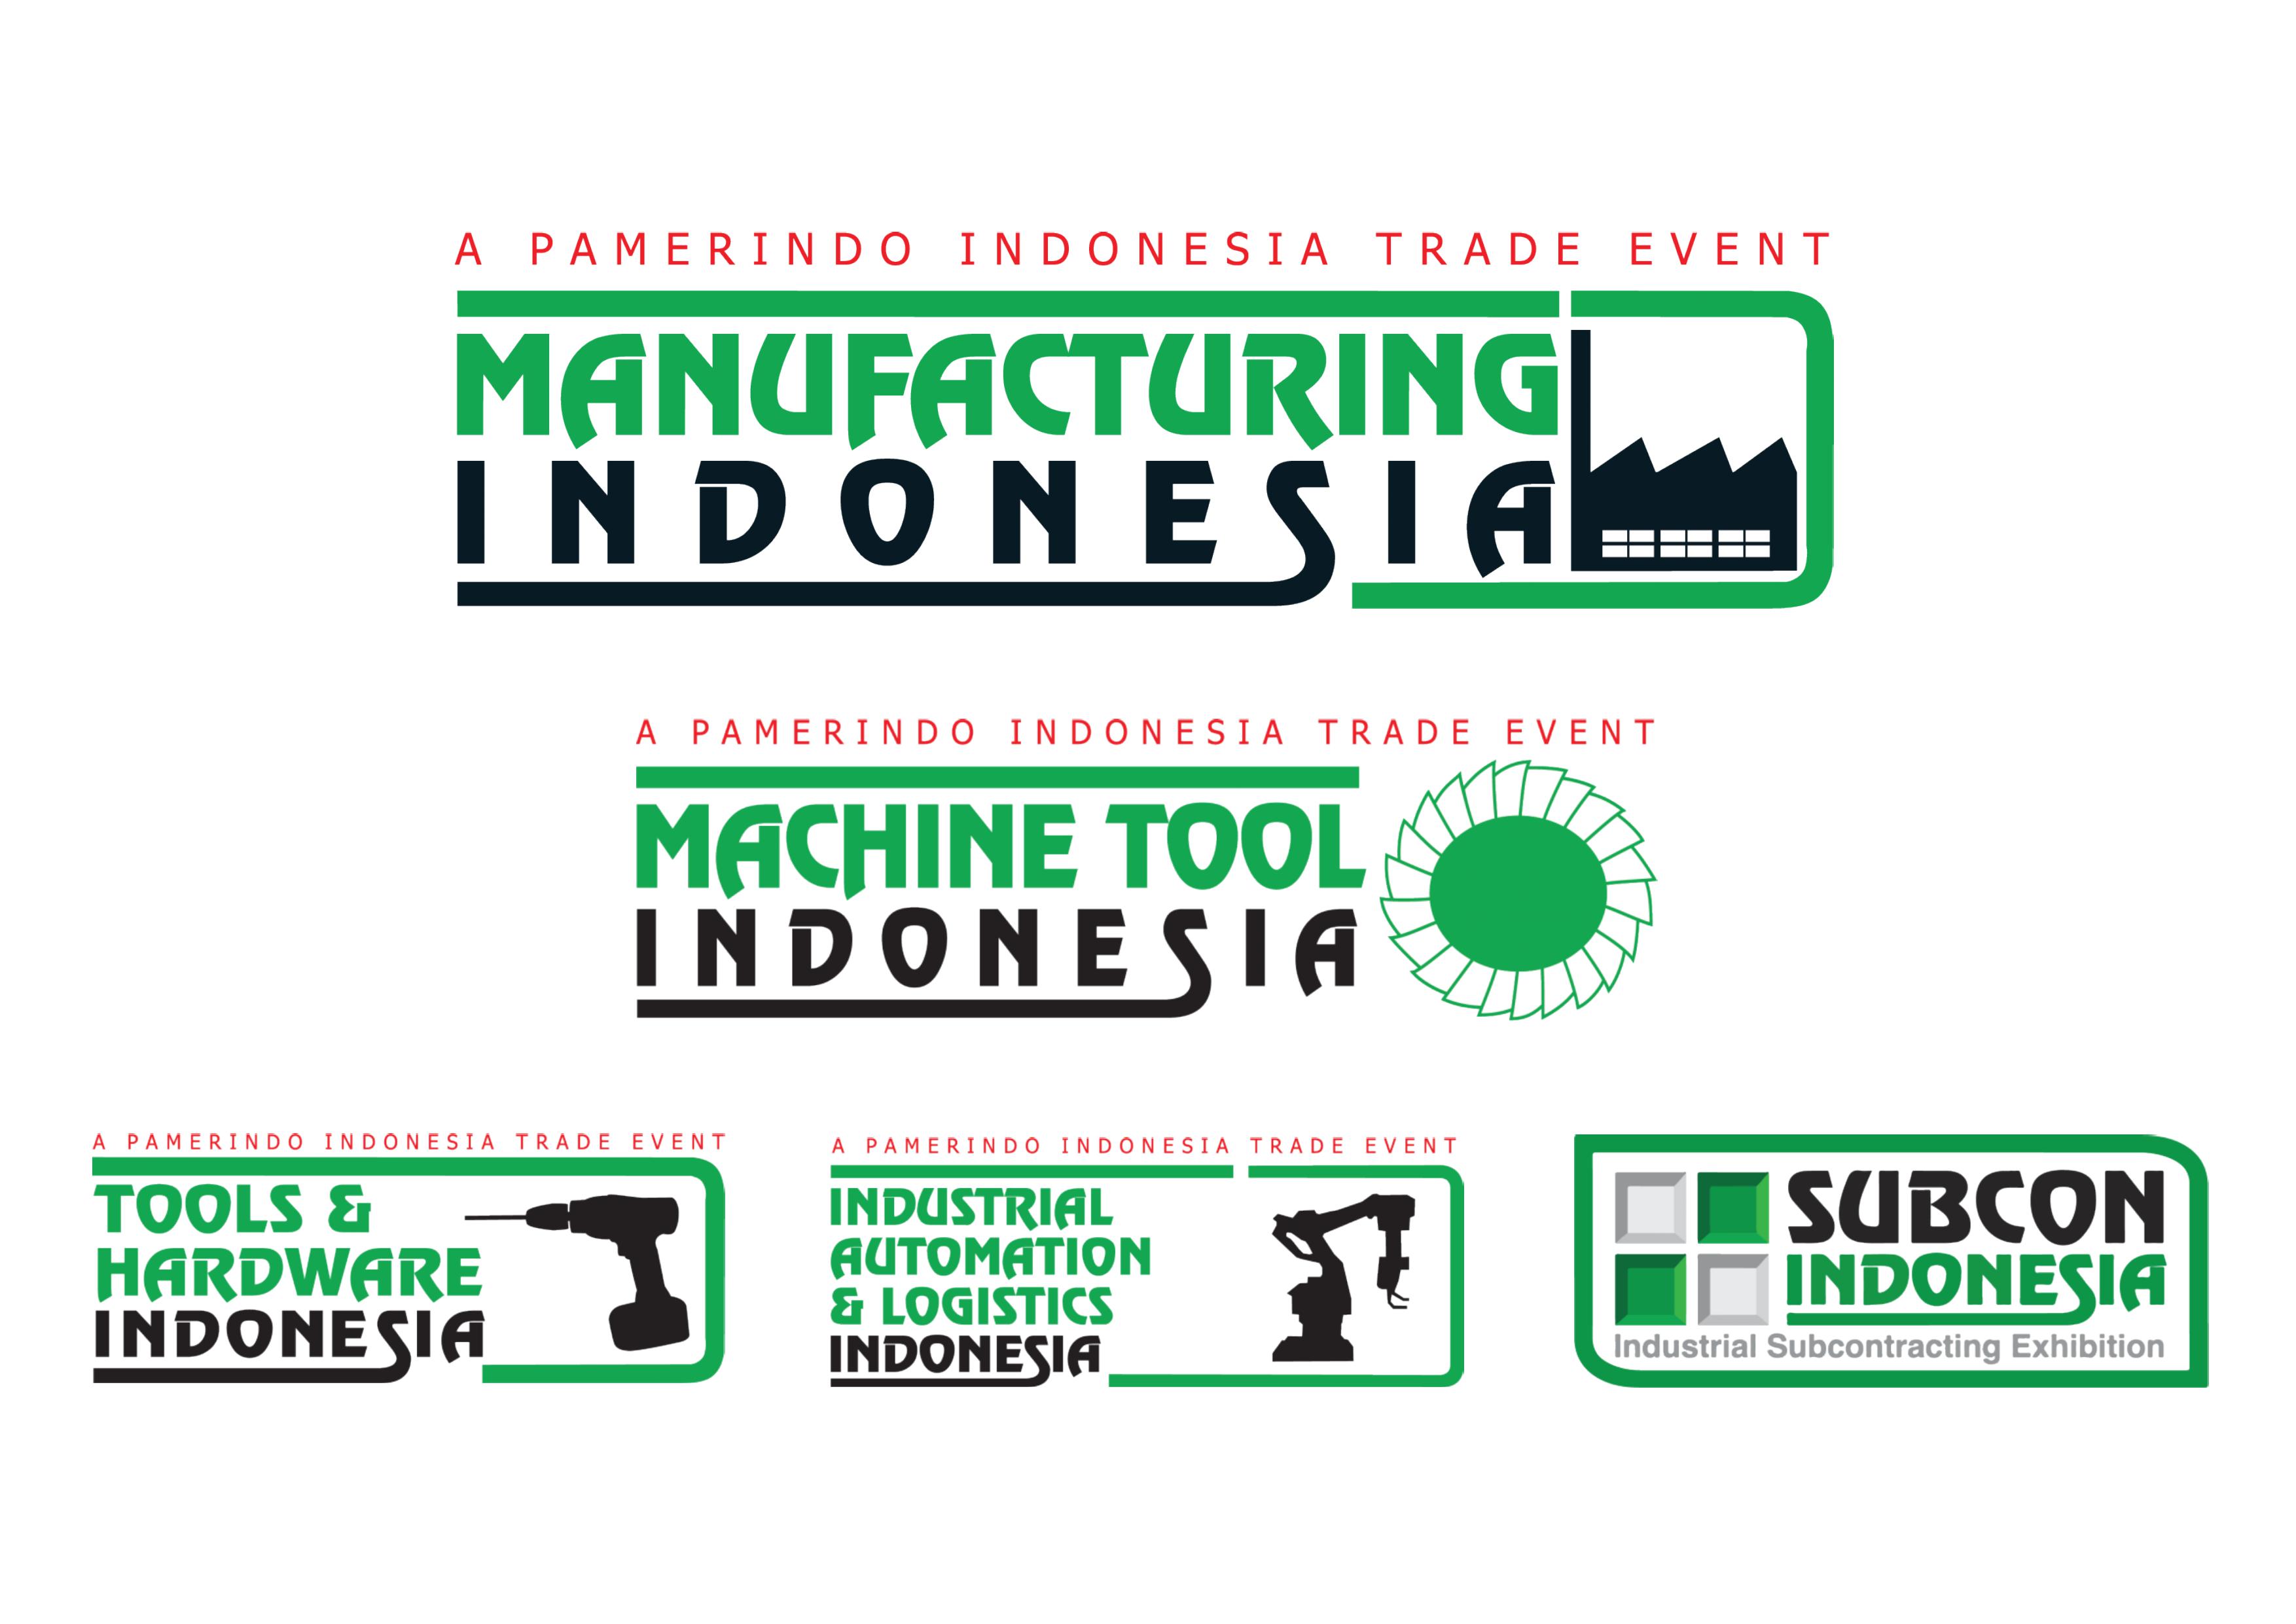 2019 The 30th International Manufacturing, Machinery, Equipment, Materials and Services Exhibition